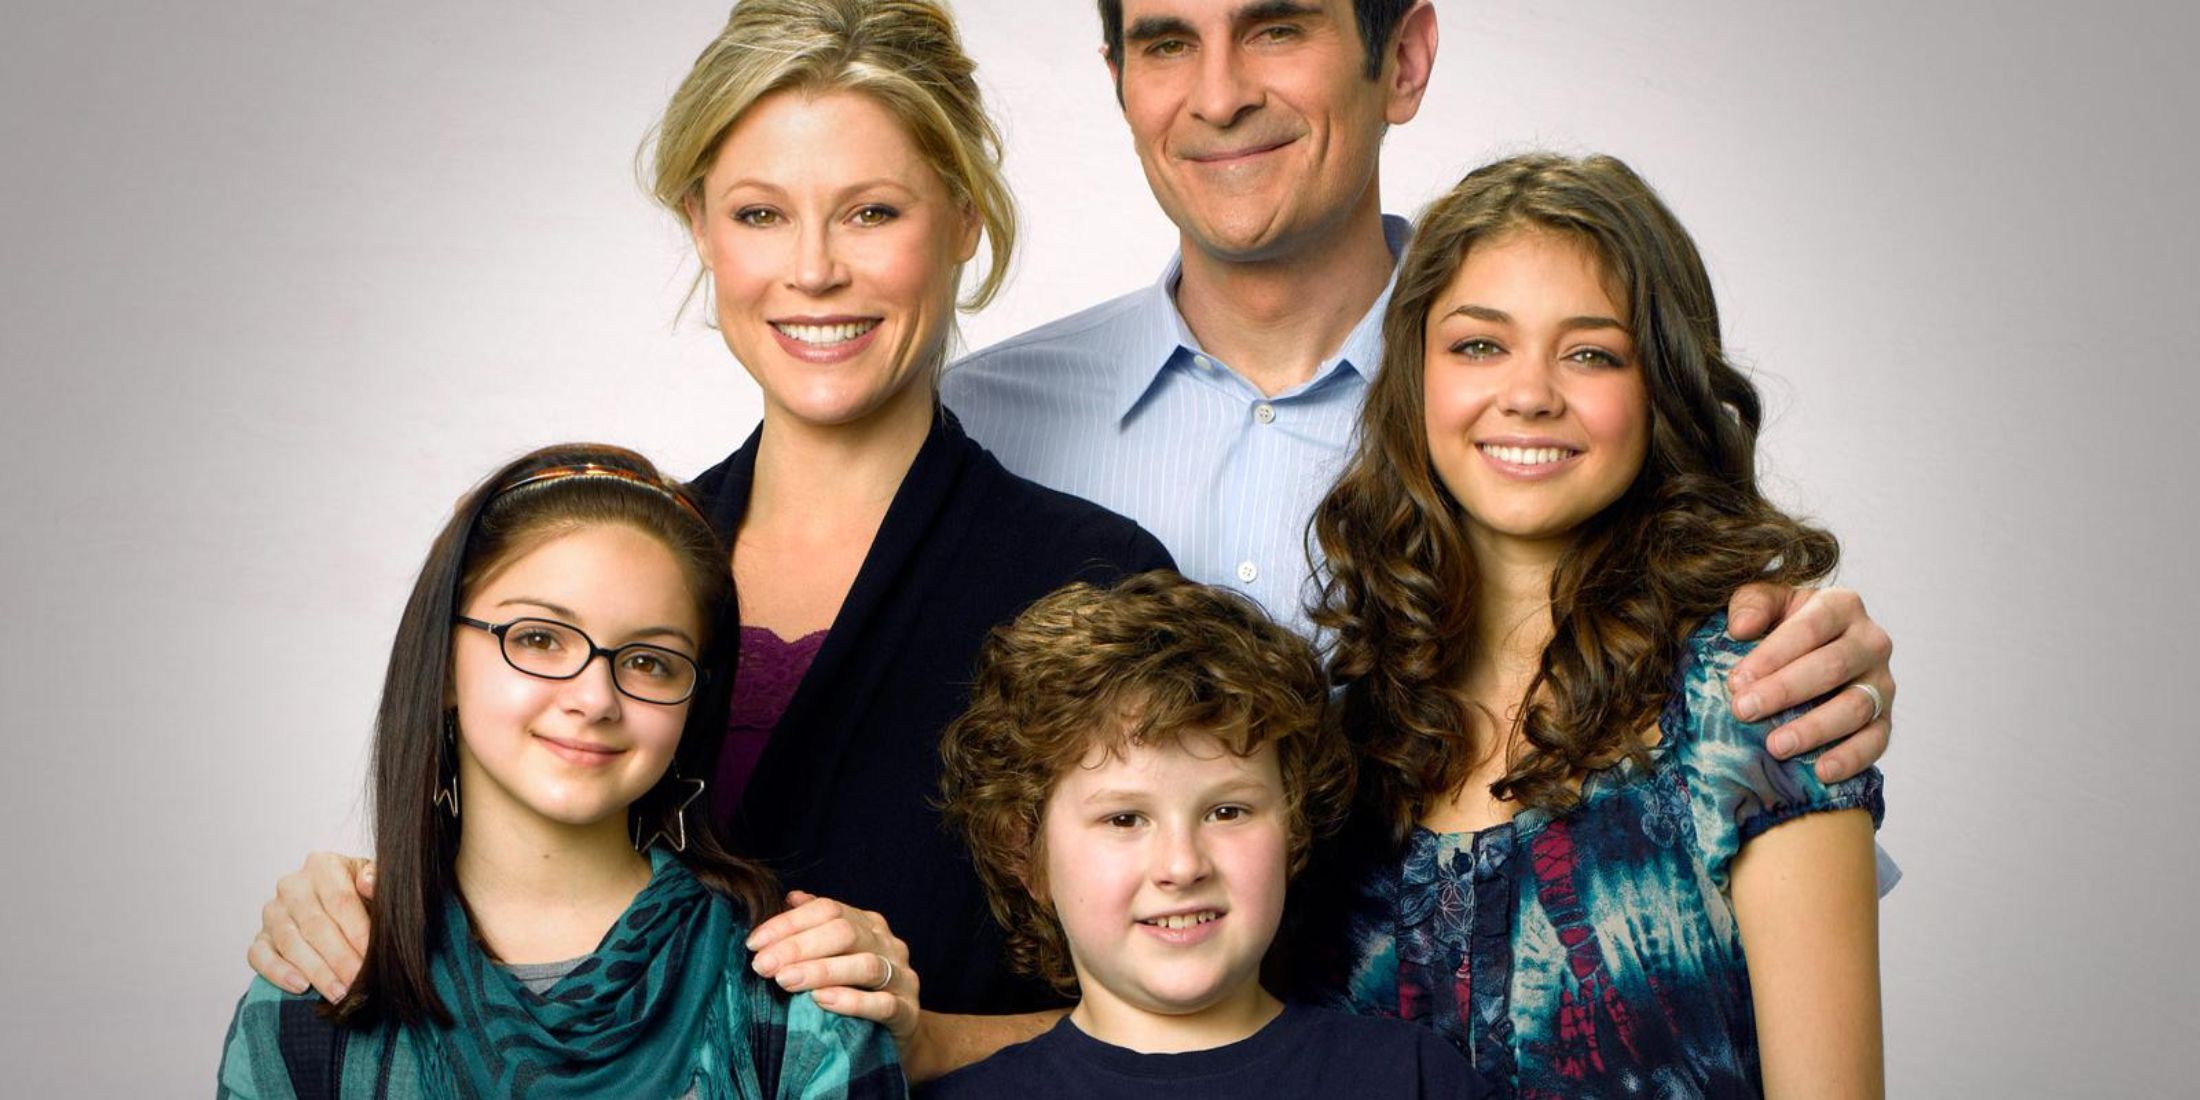 Alex, Claire, Phil, Luke and Haley in Modern Family's season 3